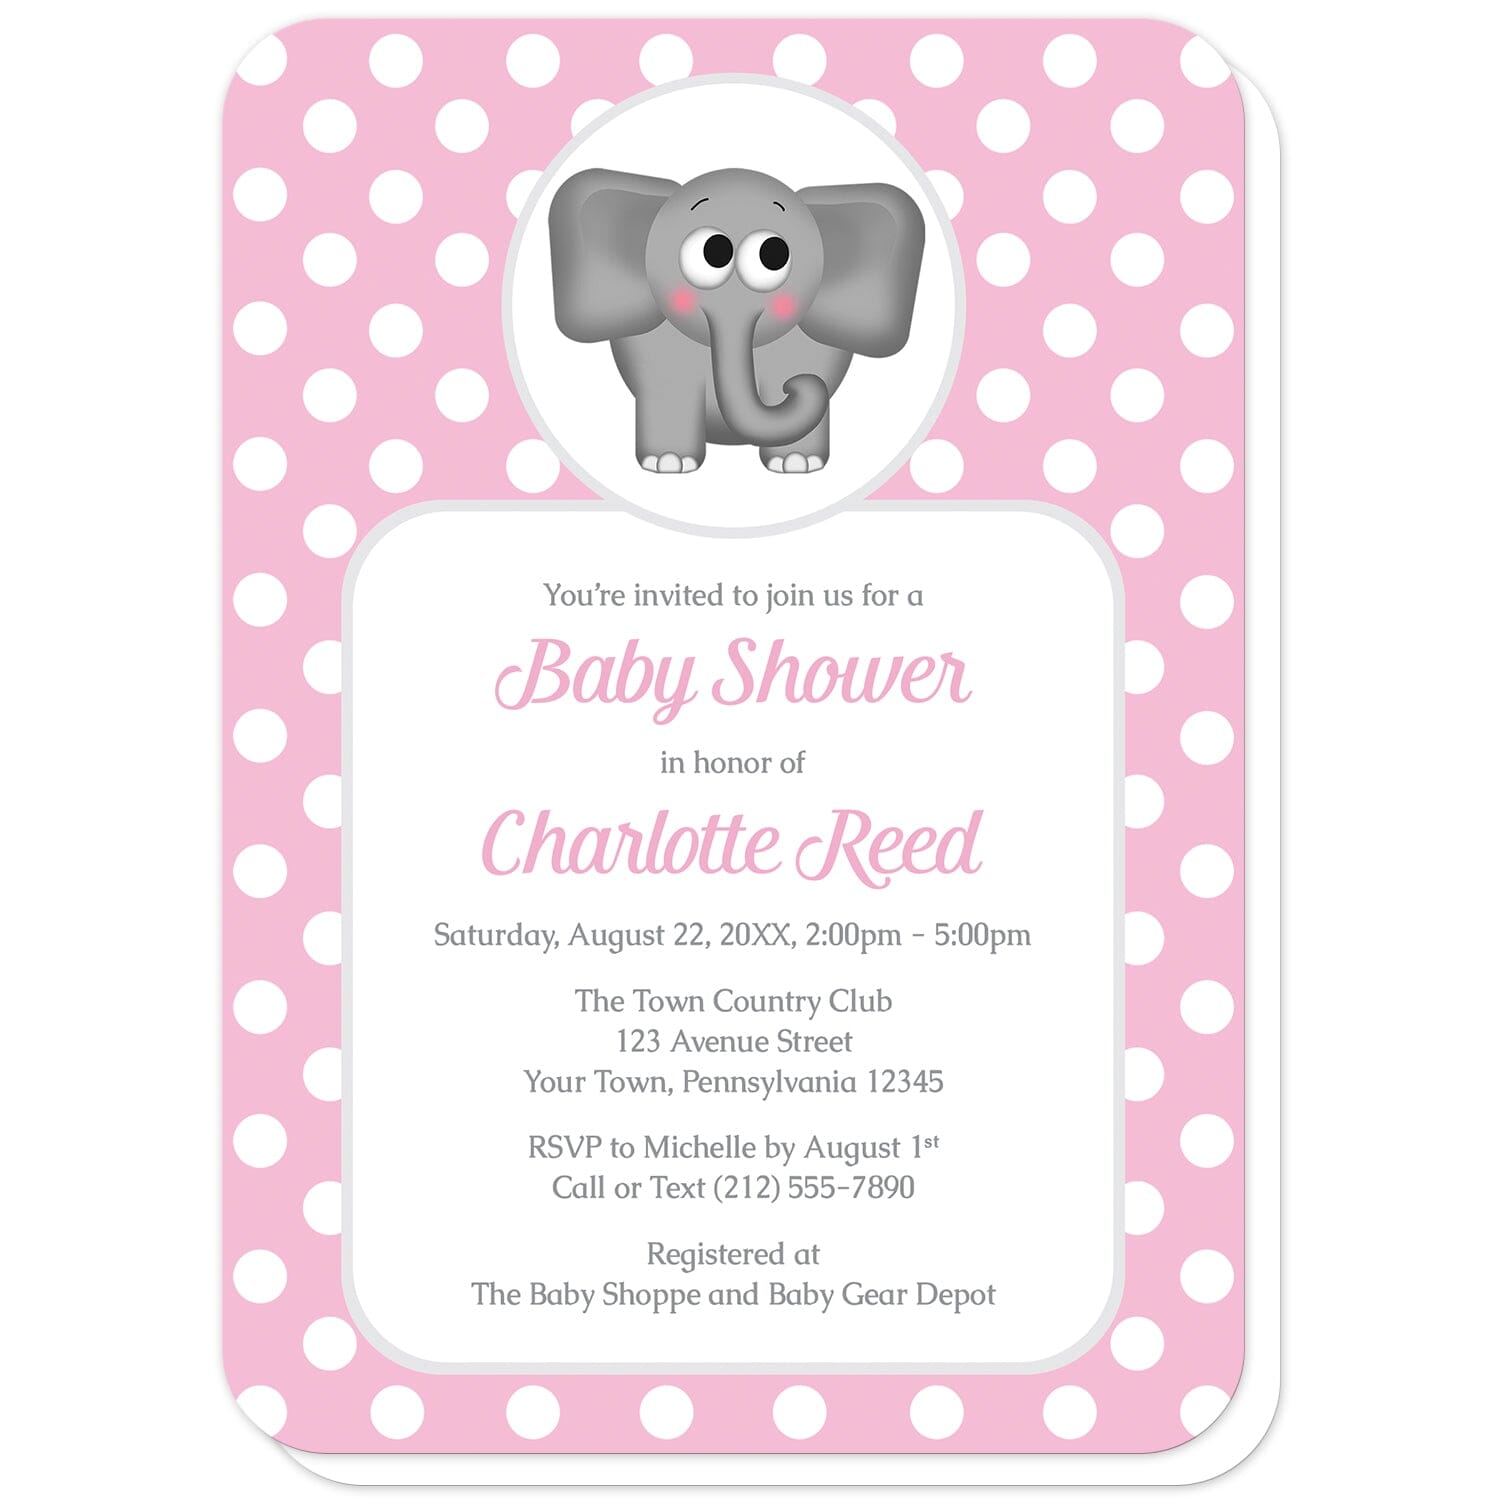 Cute Elephant Pink Polka Dot Baby Shower Invitations (with rounded corners) at Artistically Invited. Cute elephant pink polka dot baby shower invitations that are illustrated with an affectionate and adorable gray elephant over a pink polka dot background. Your personalized baby shower details are custom printed in pink and gray over a white rectangular area over the pink polka dot background.